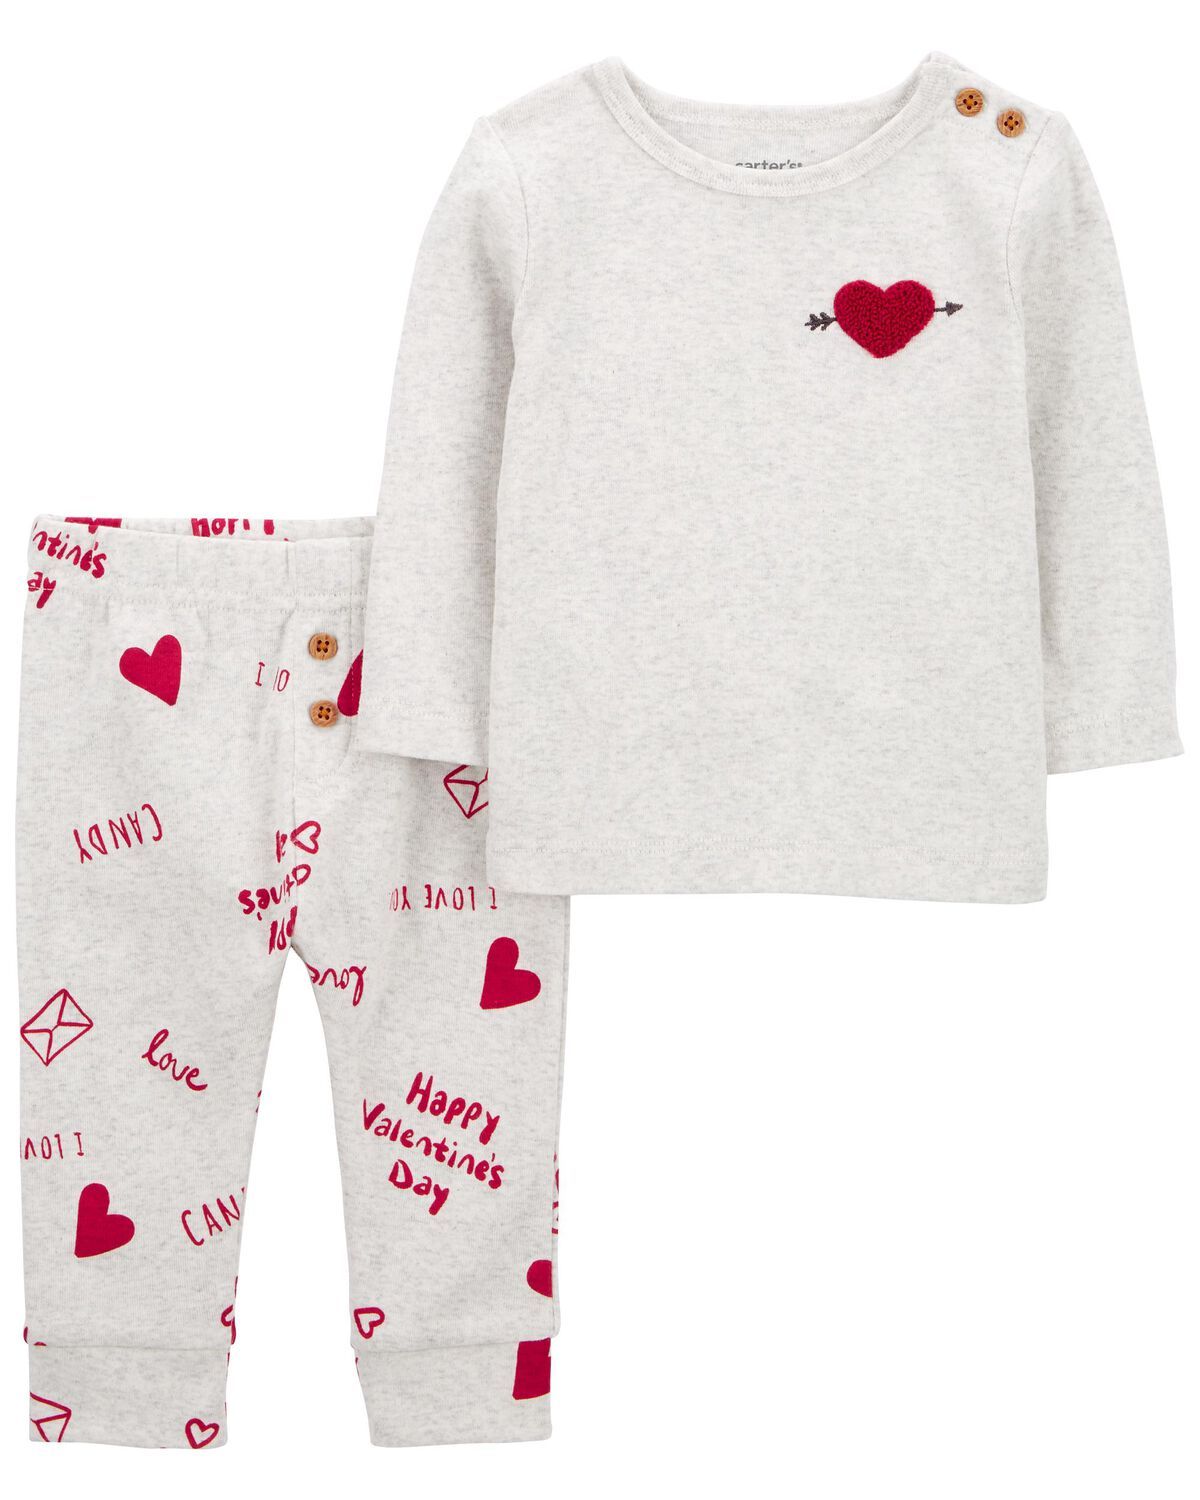 Heather Baby 2-Piece Valentine's Day Outfit Set | carters.com | Carter's